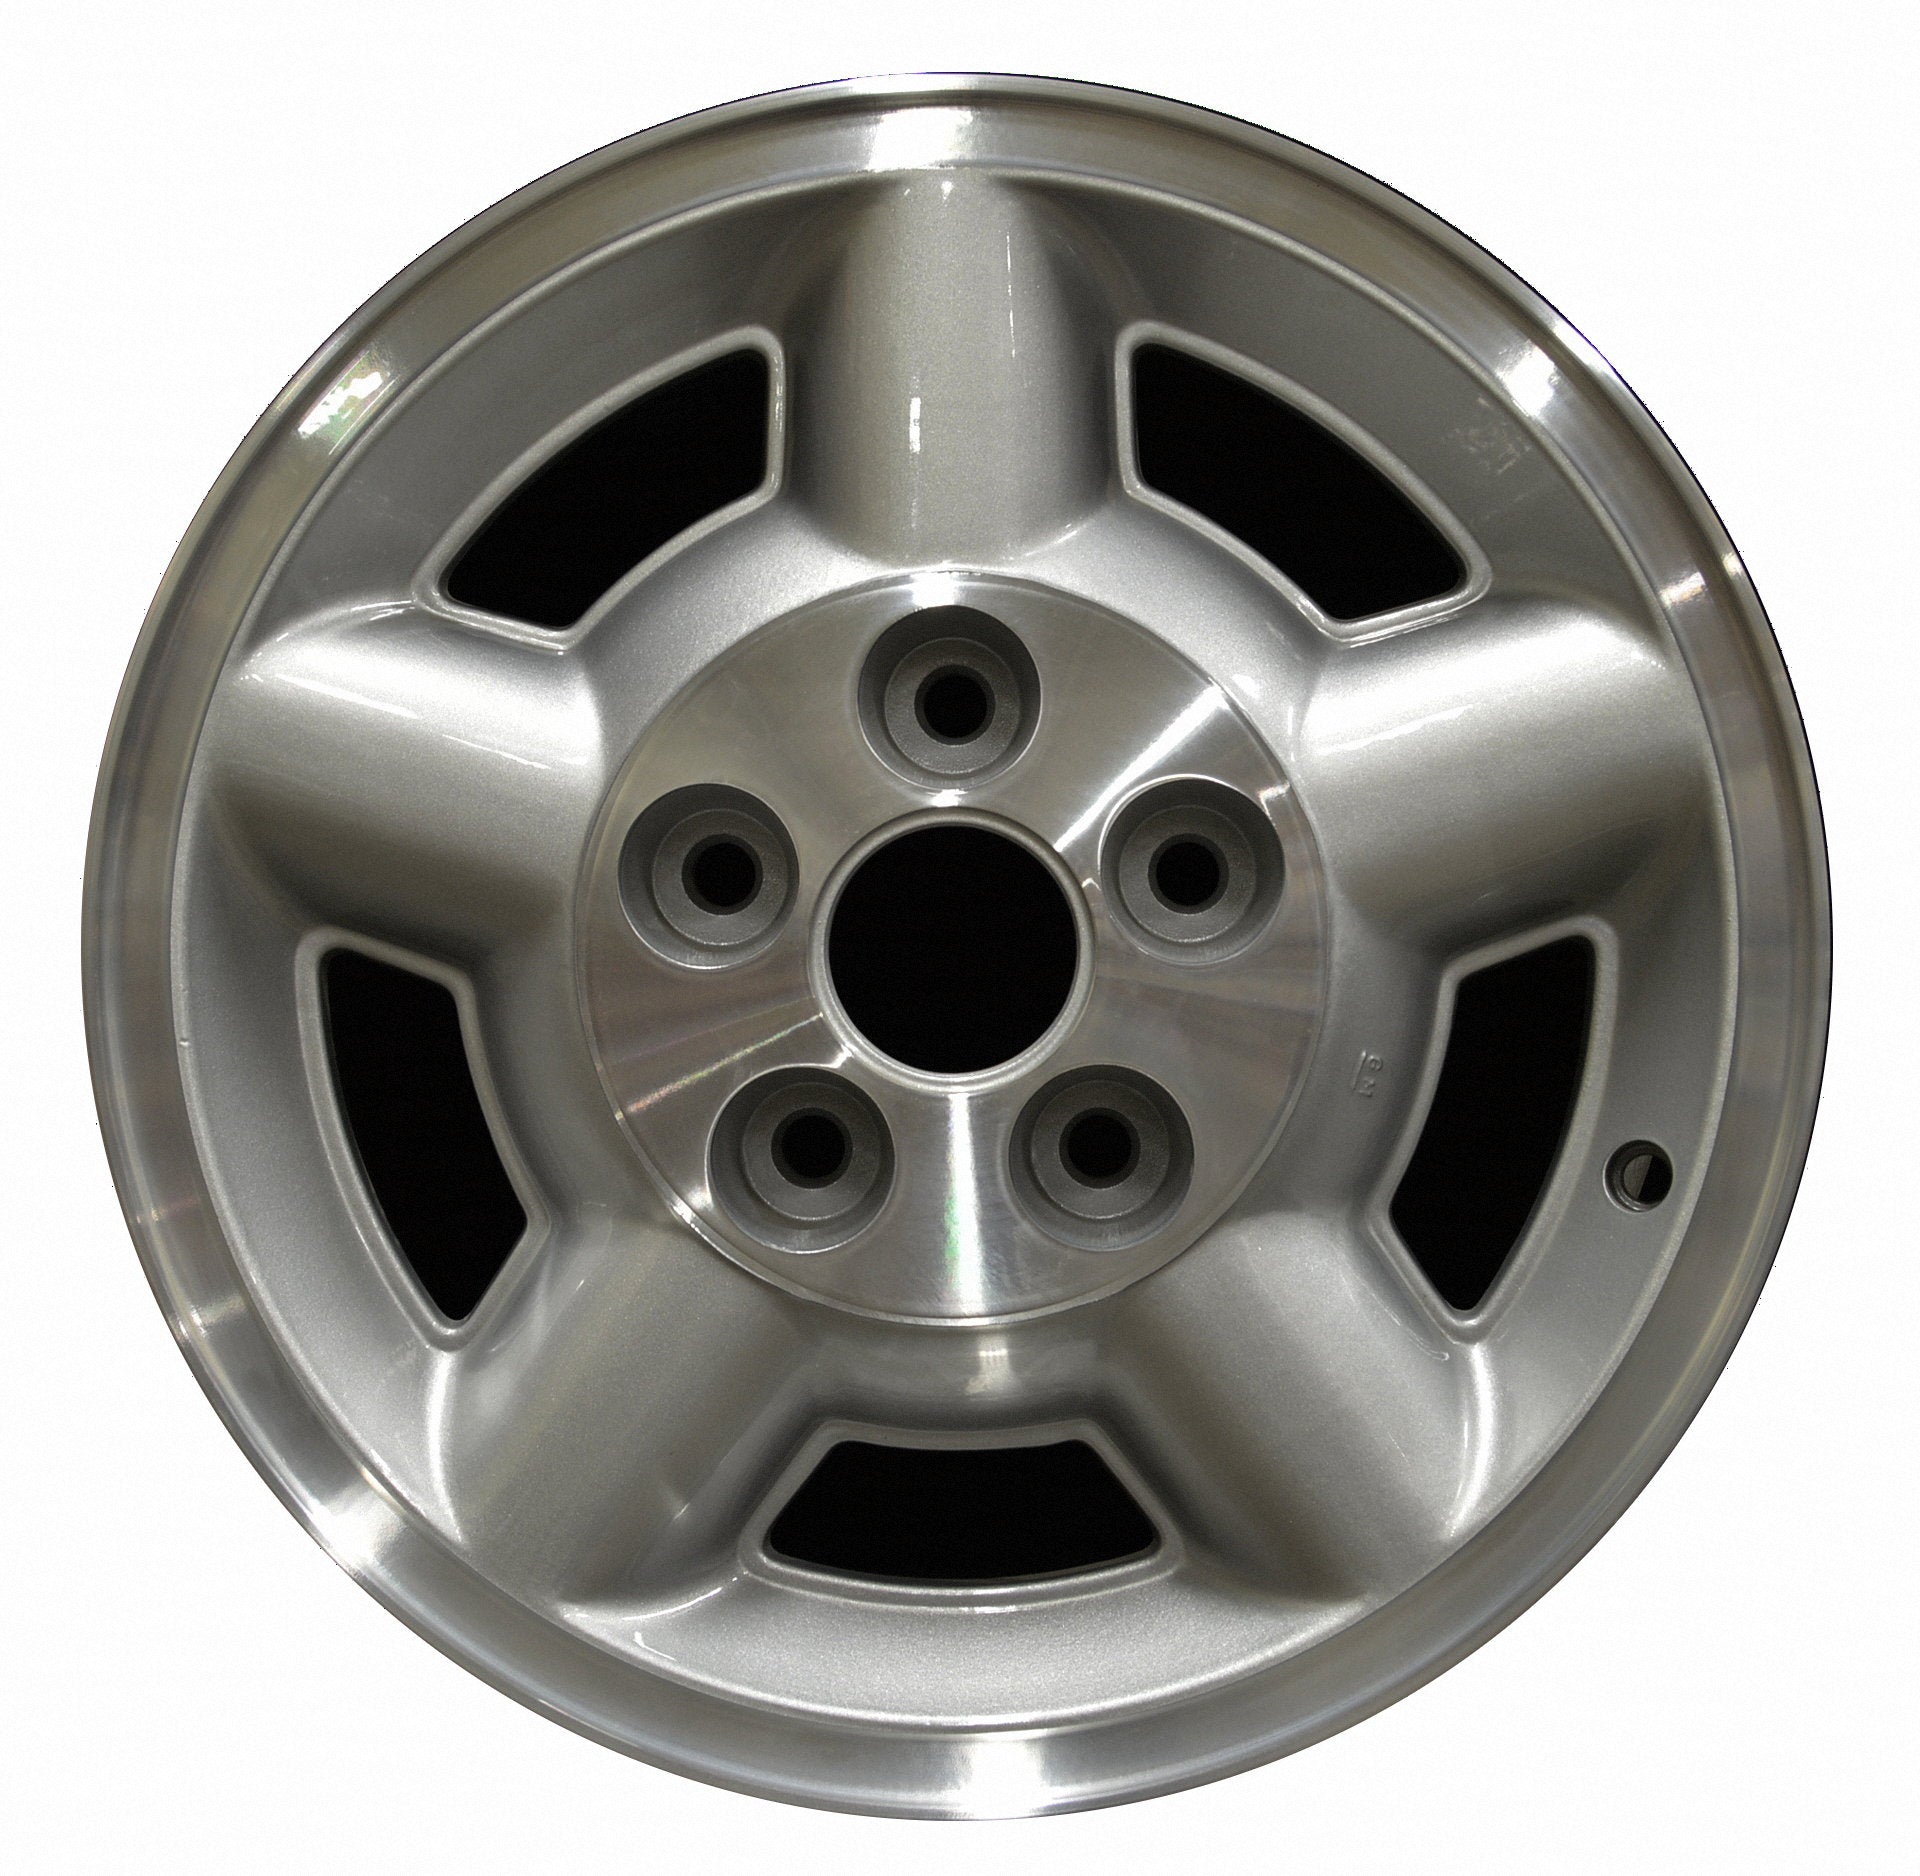 Chevrolet S10 Truck  1995, 1996, 1997, 1998, 1999, 2000, 2001, 2002, 2003, 2004 Factory OEM Car Wheel Size 15x7 Alloy WAO.5038.PS01.MA